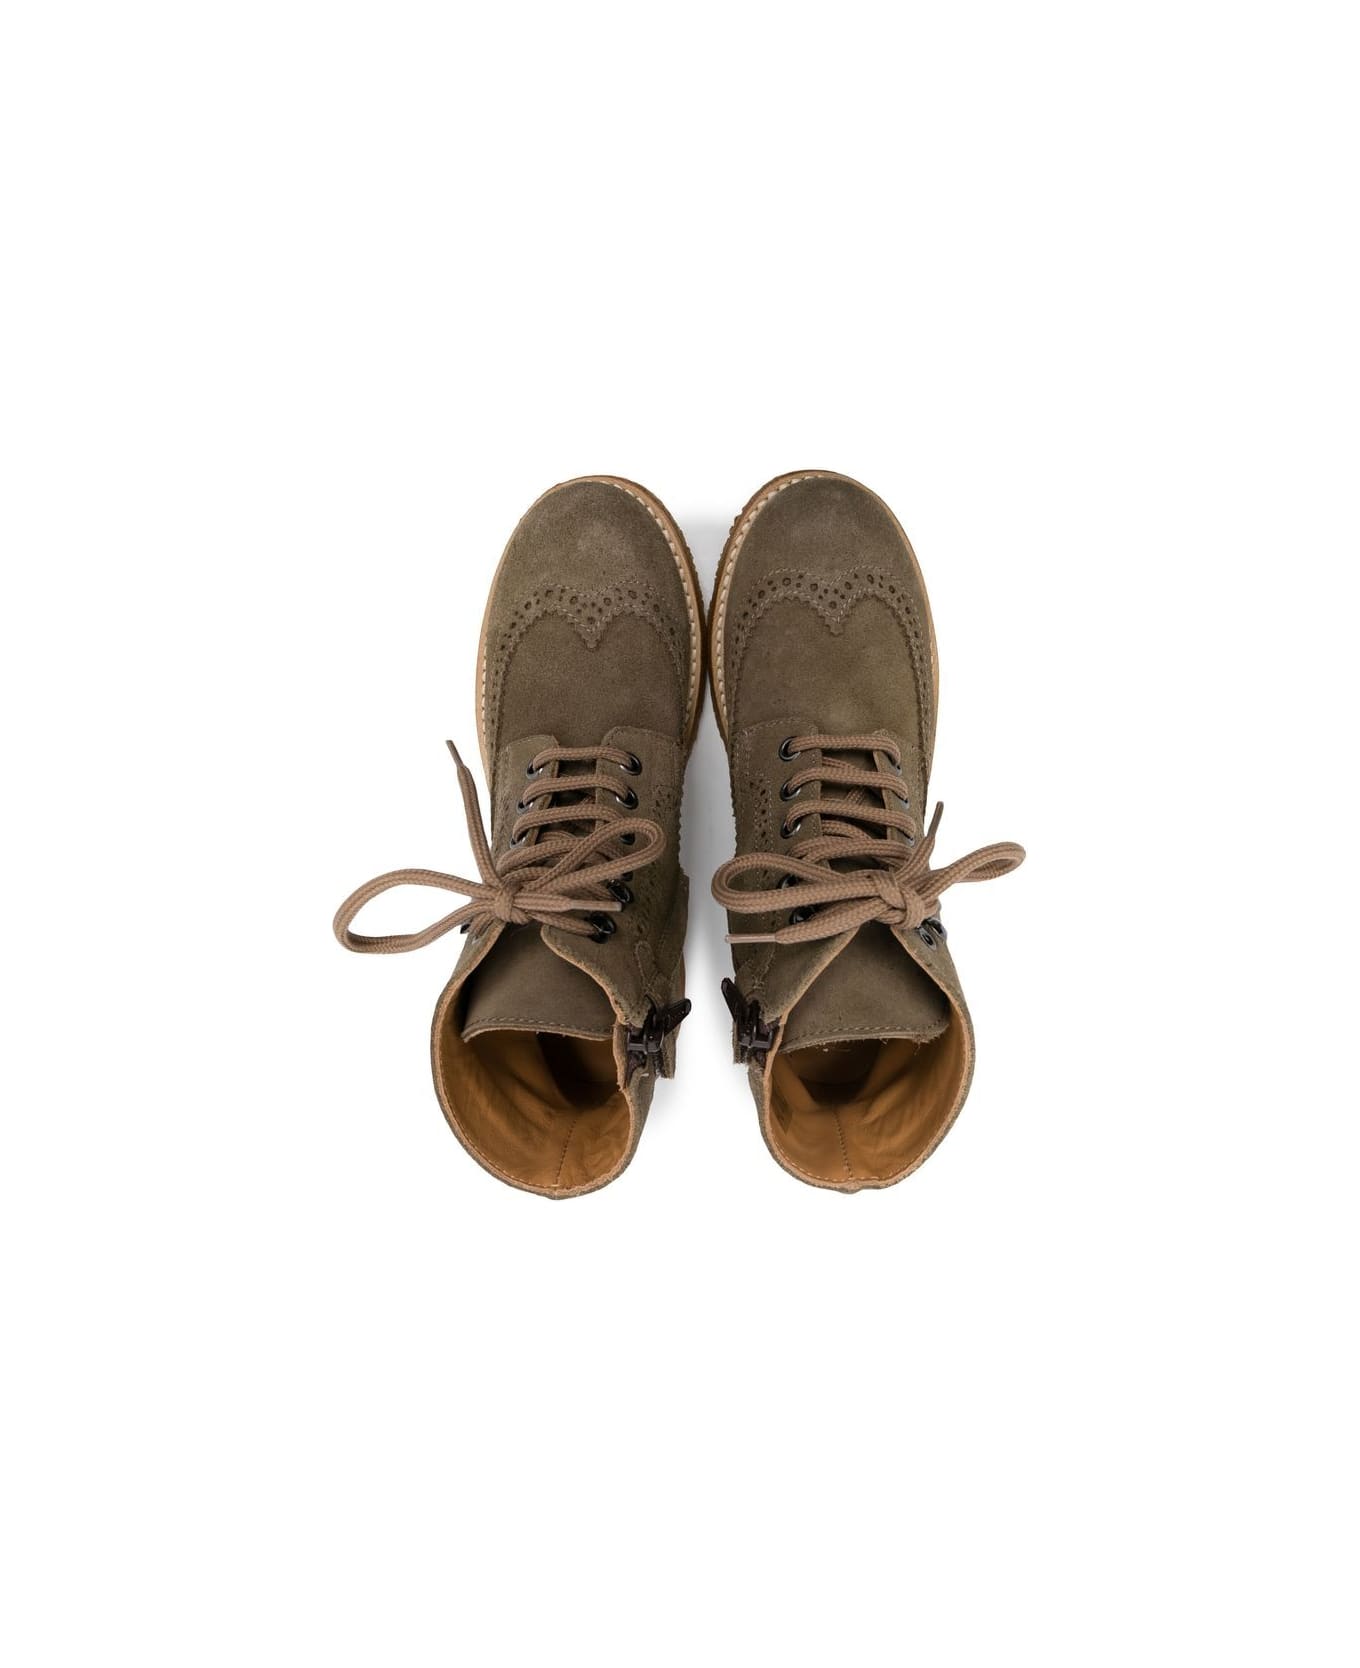 Gallucci Lace-up Suede Brogue Boots - Beige シューズ